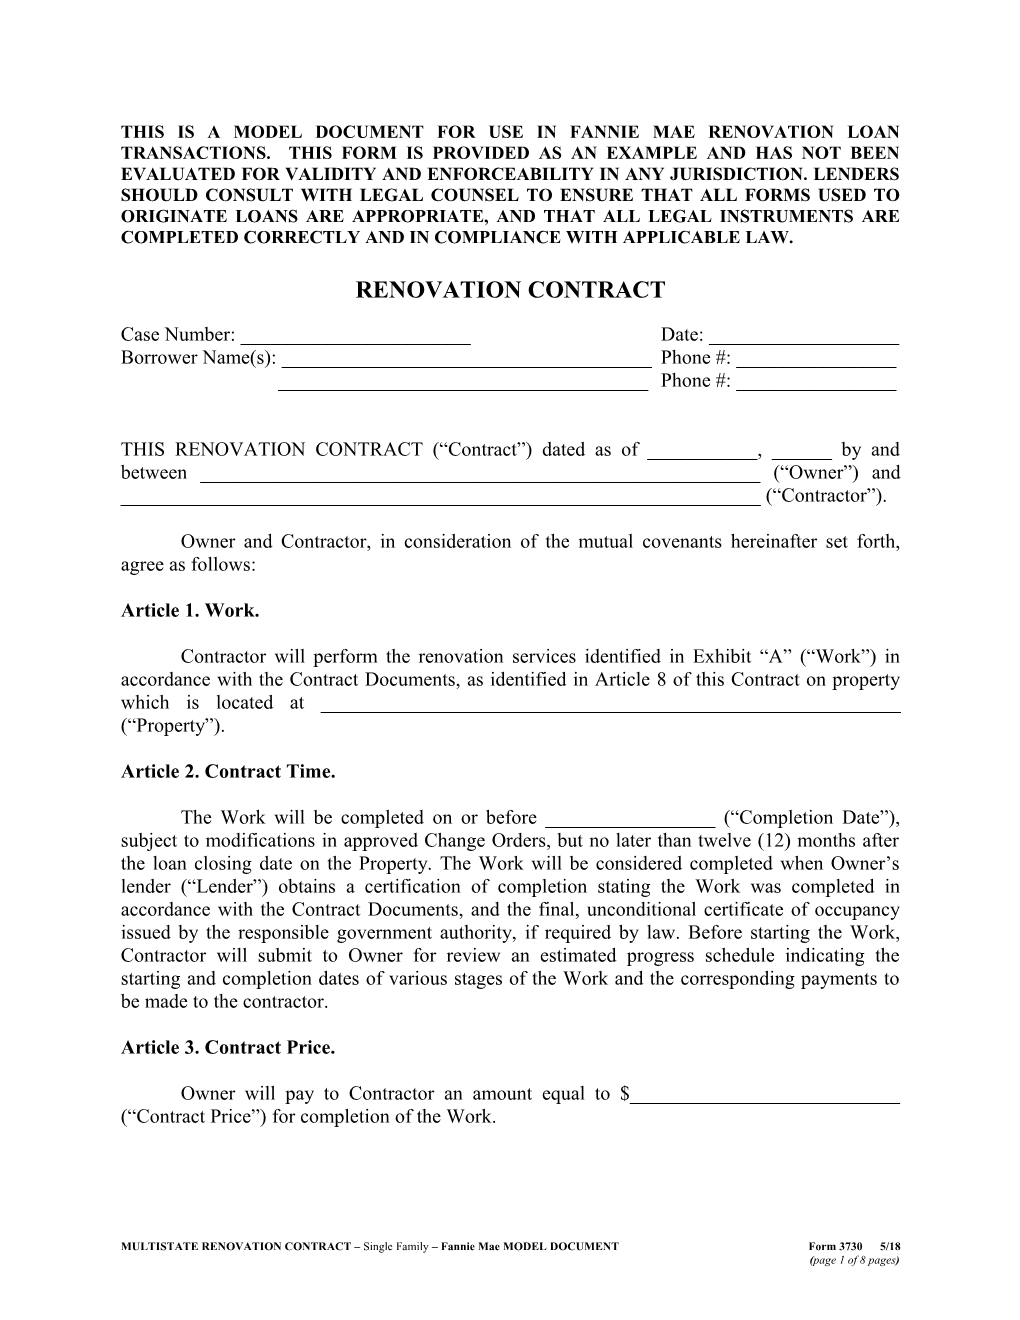 This Is a Model Document for Use in Fannie Mae Renovation Loan Transactions. This Form